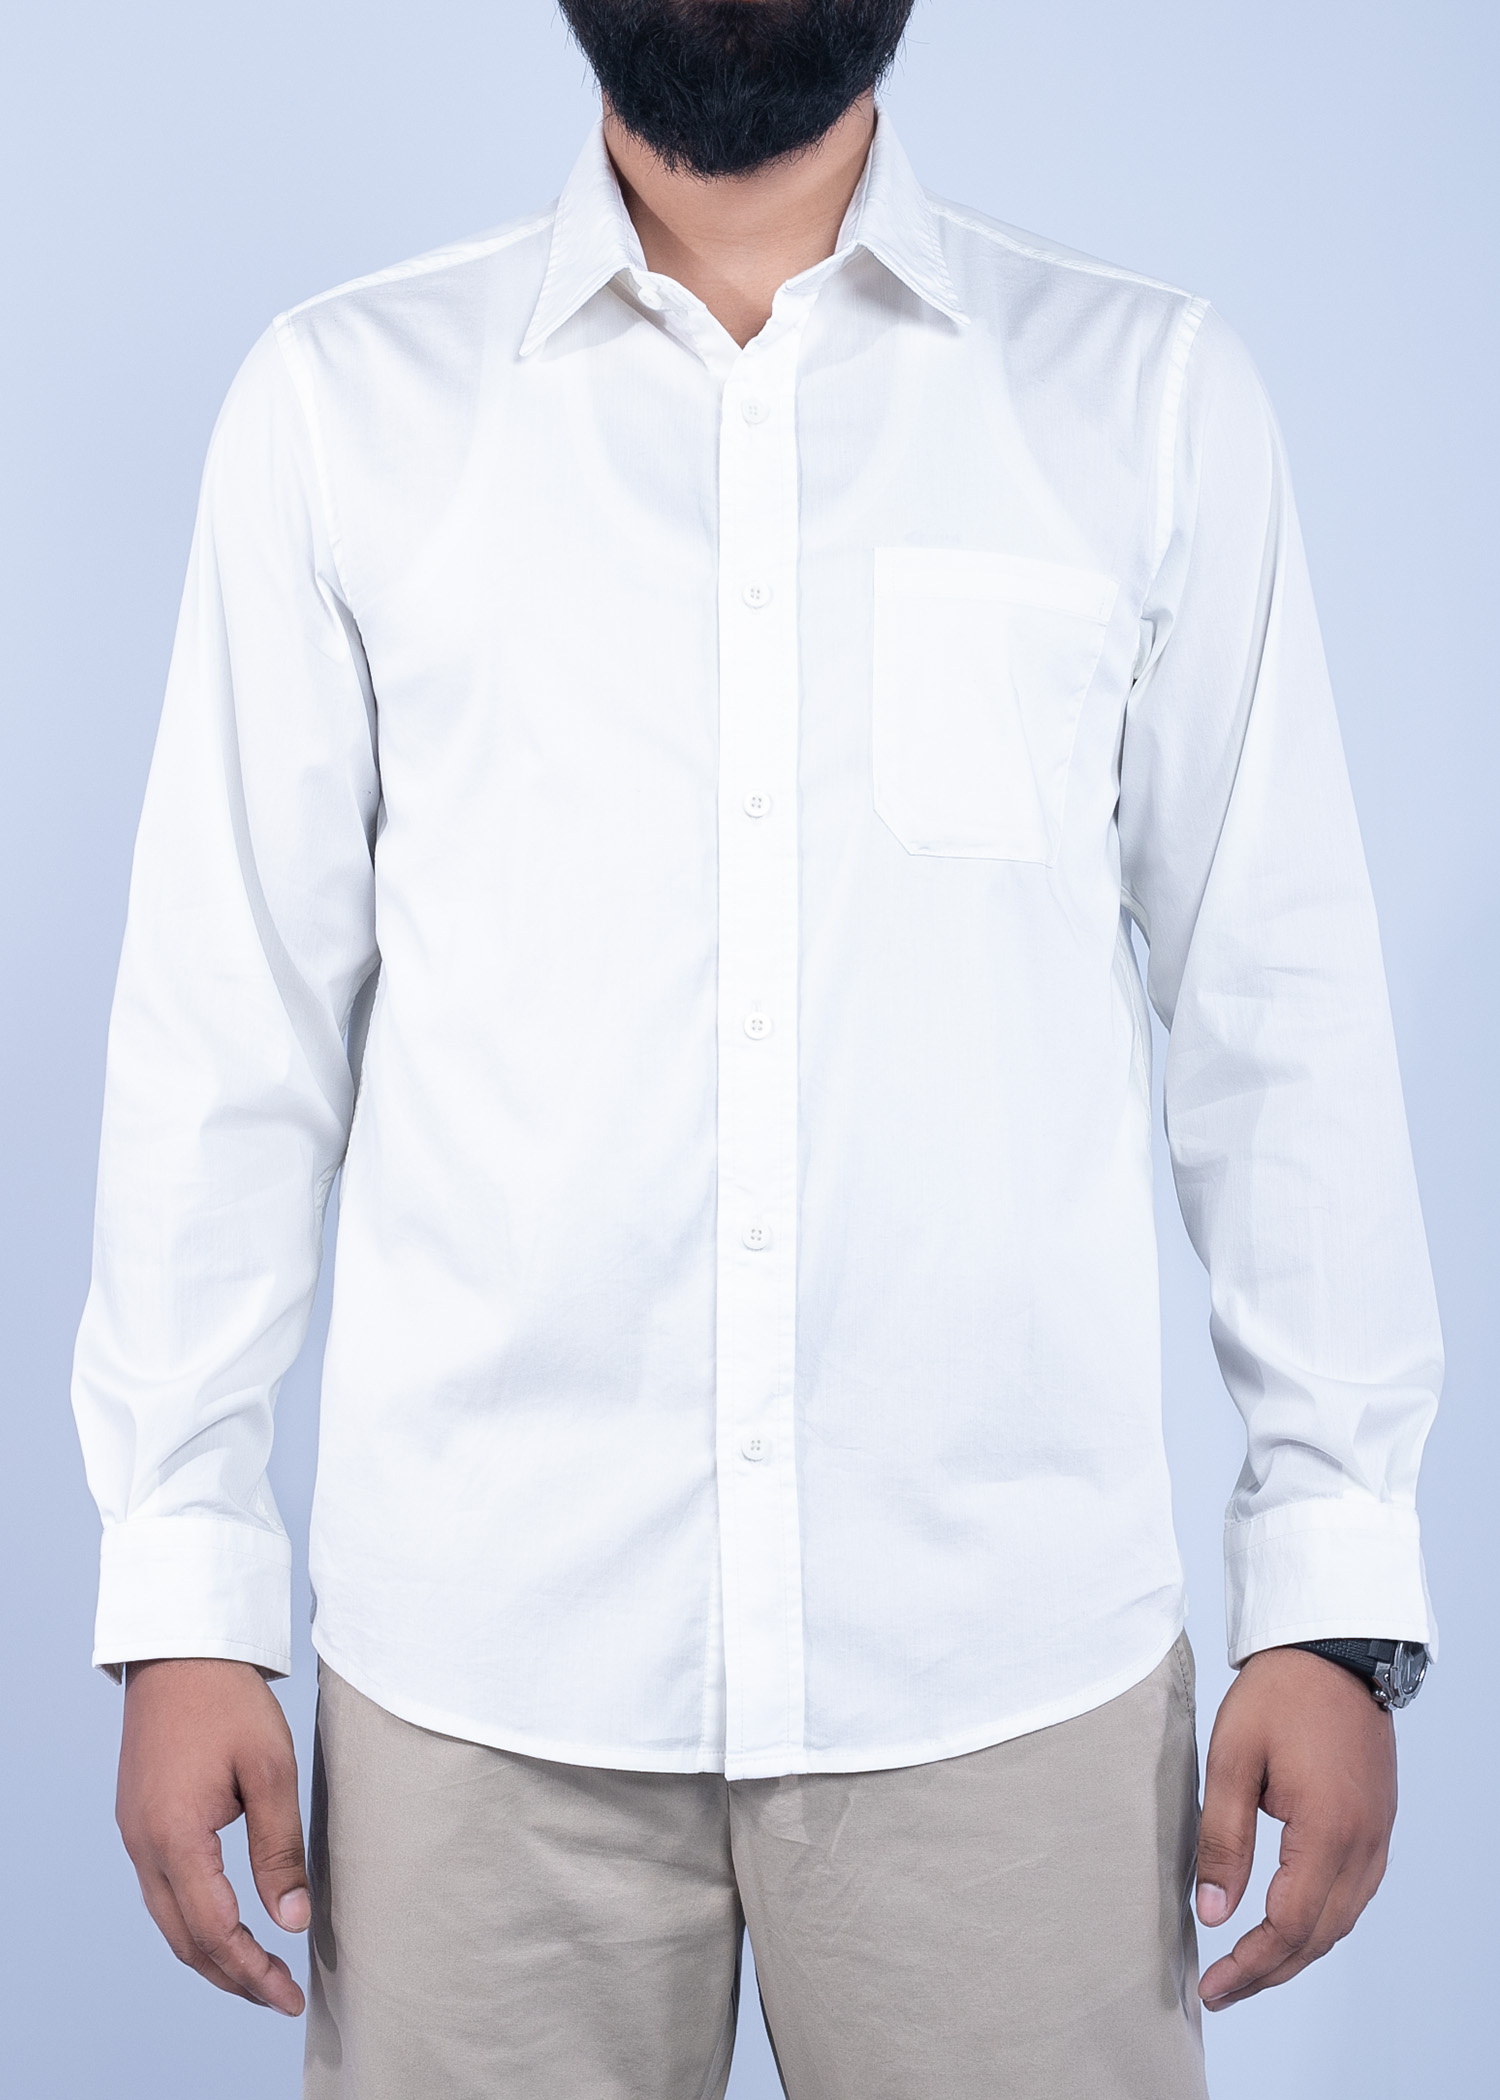 darab ls shirt cream white color half front view